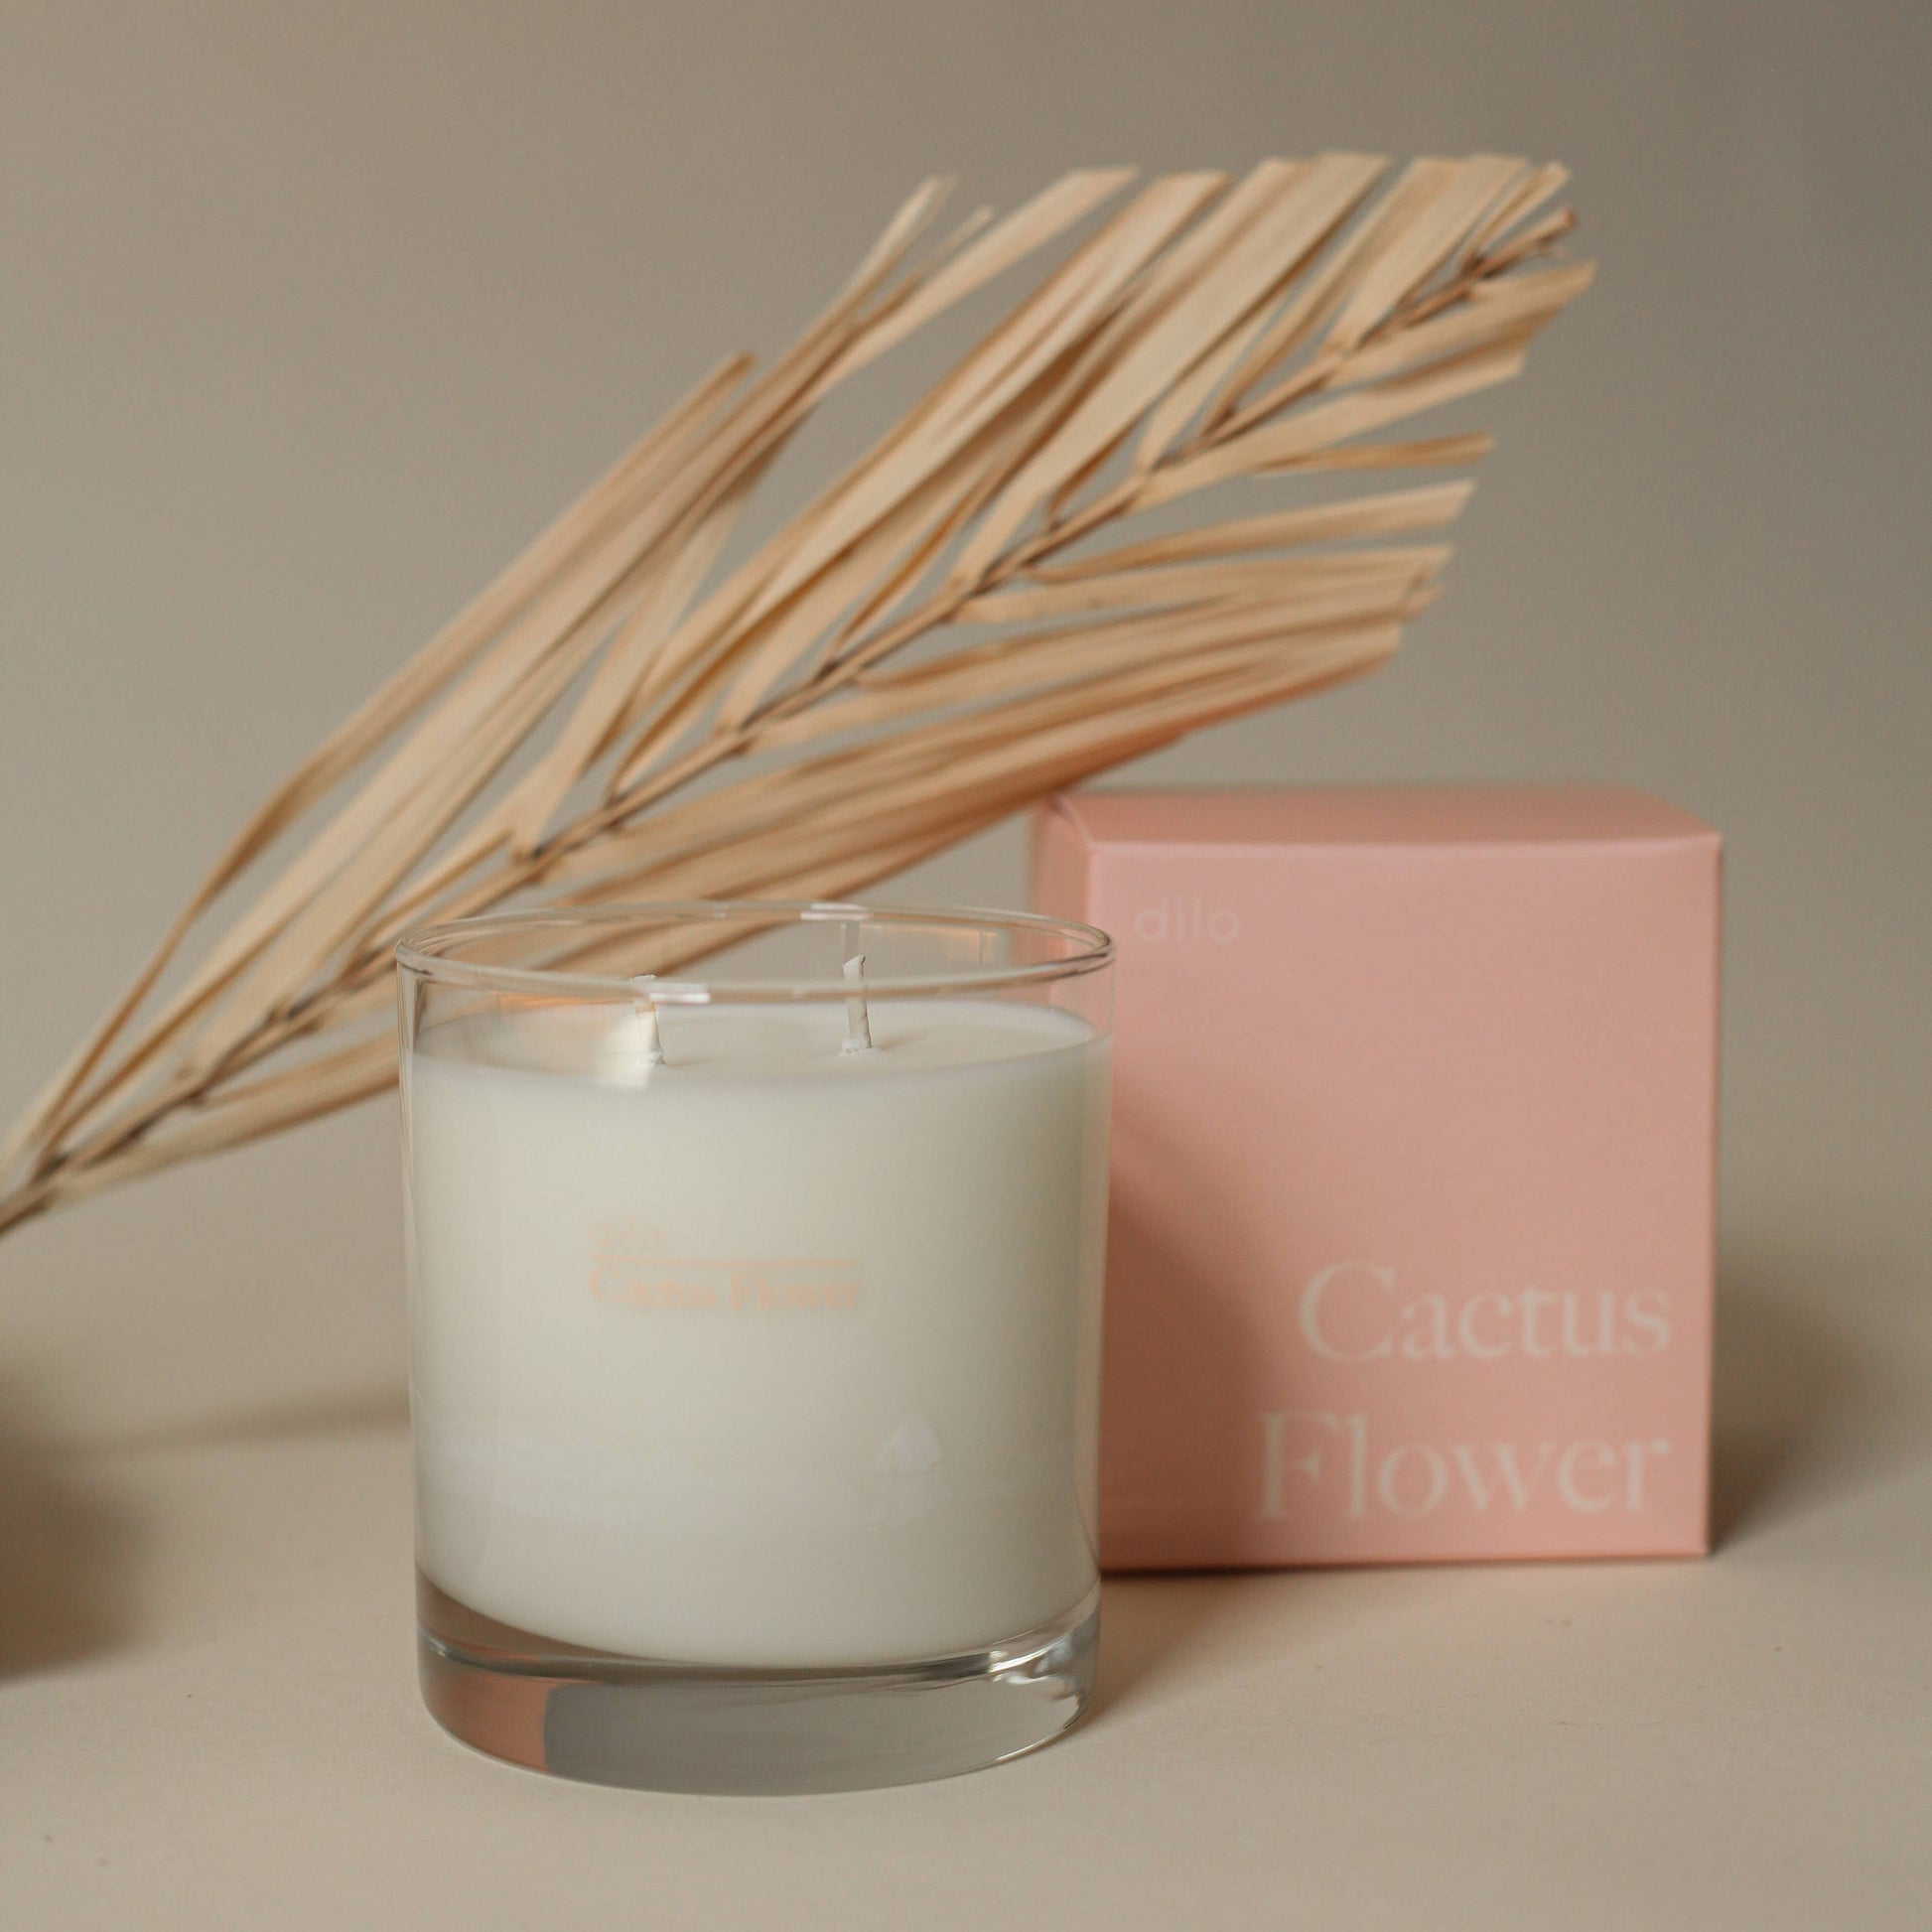 CACTUS FLOWER CANDLE - The Crowd Went Wild